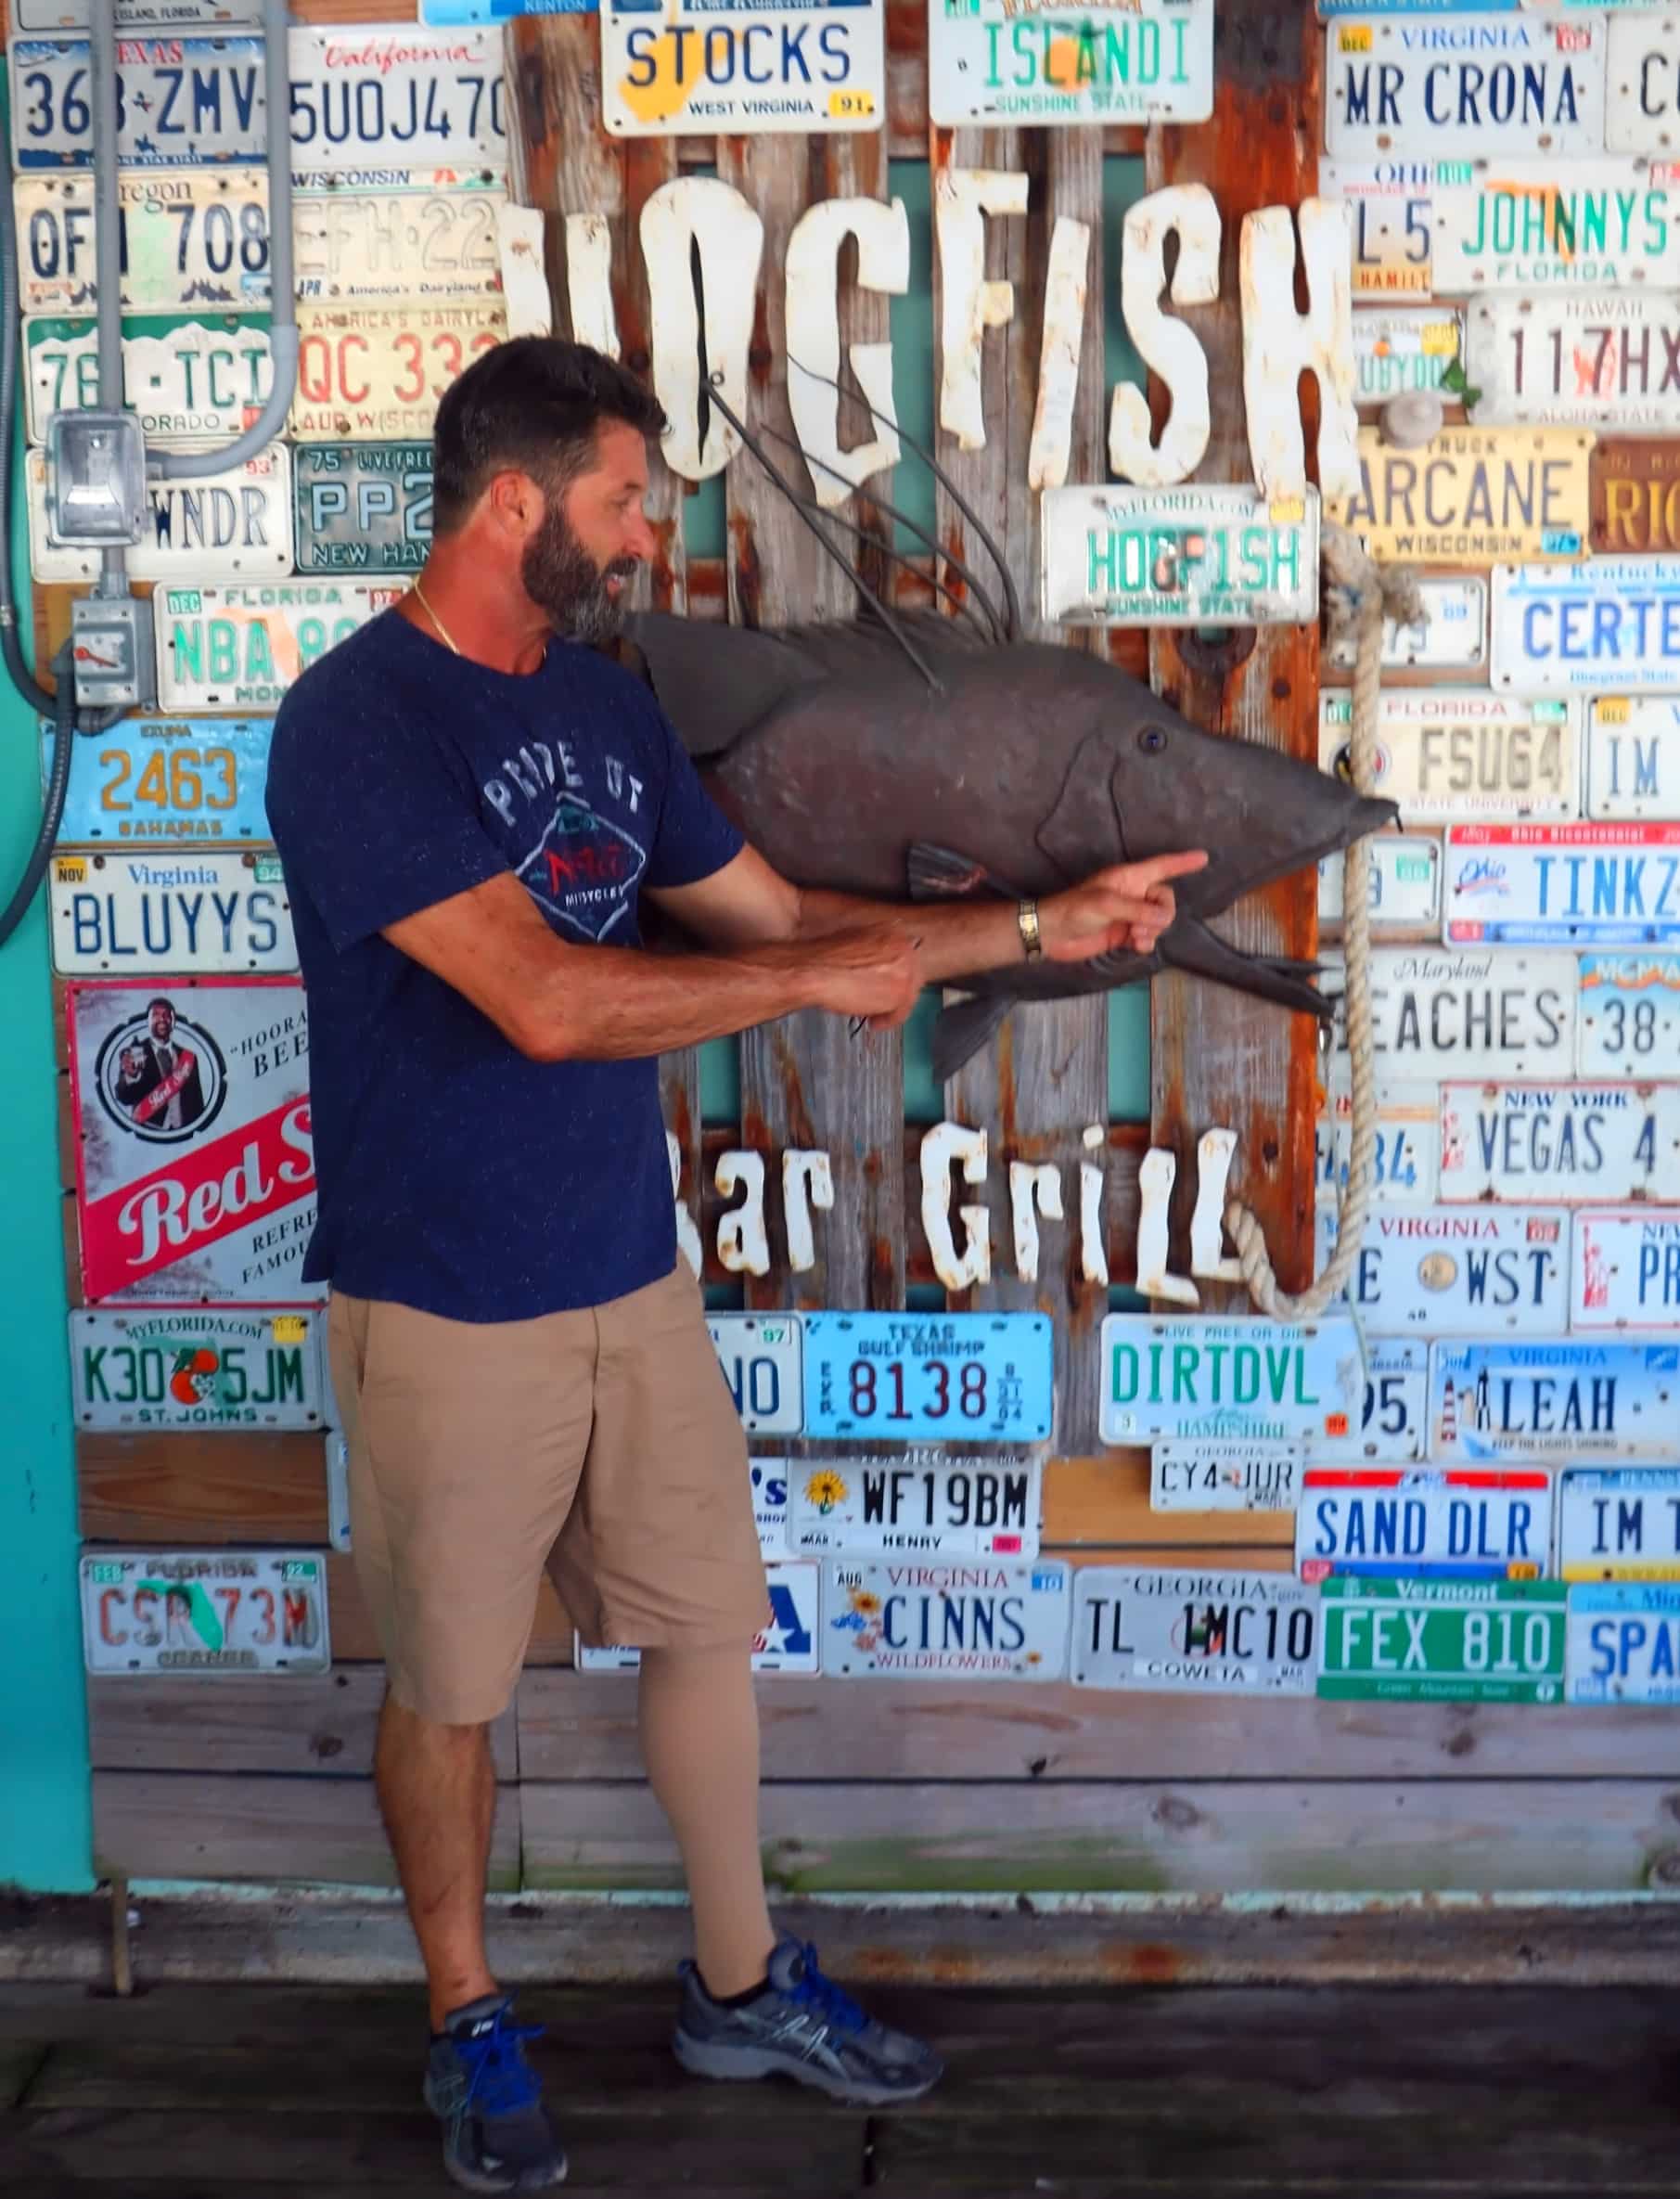 Owner Bobby Mongelli alongside hogfish model and license plates of diners from around the nation (Credit: Bill Rockwell)